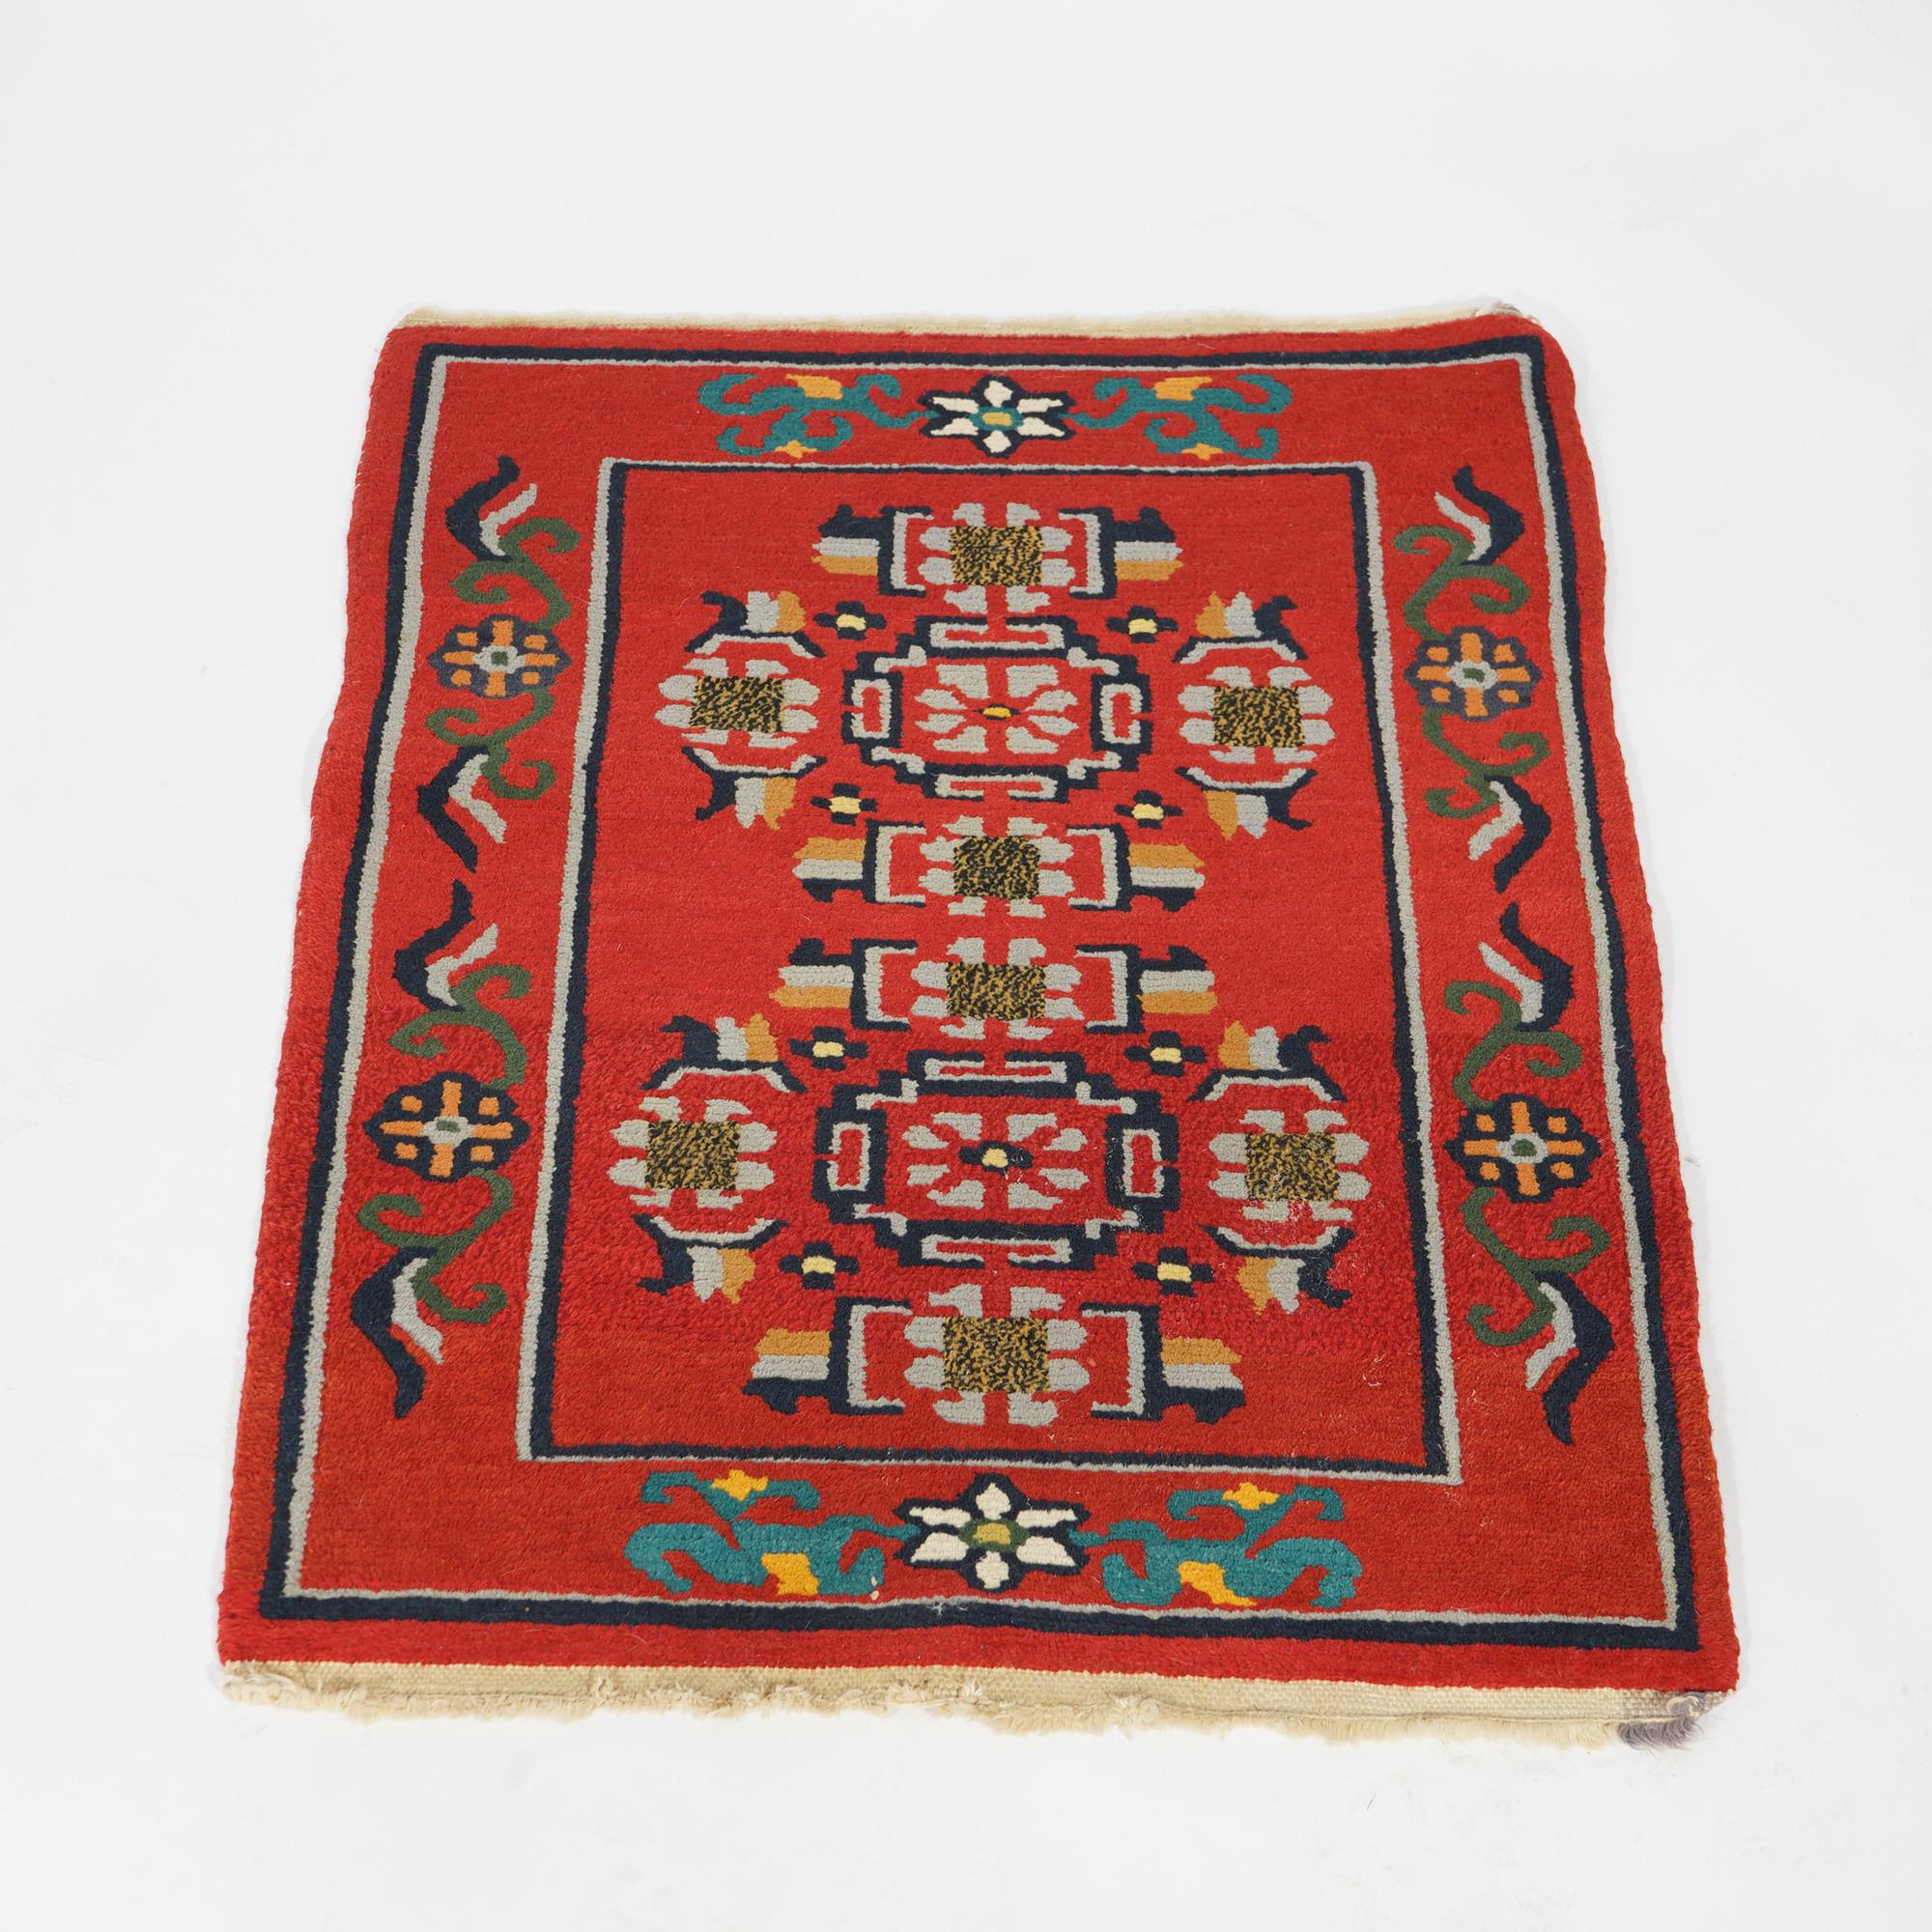 An antique Chinese rug offers wool construction with stylized foliate design, 20th century

Measures 34.5